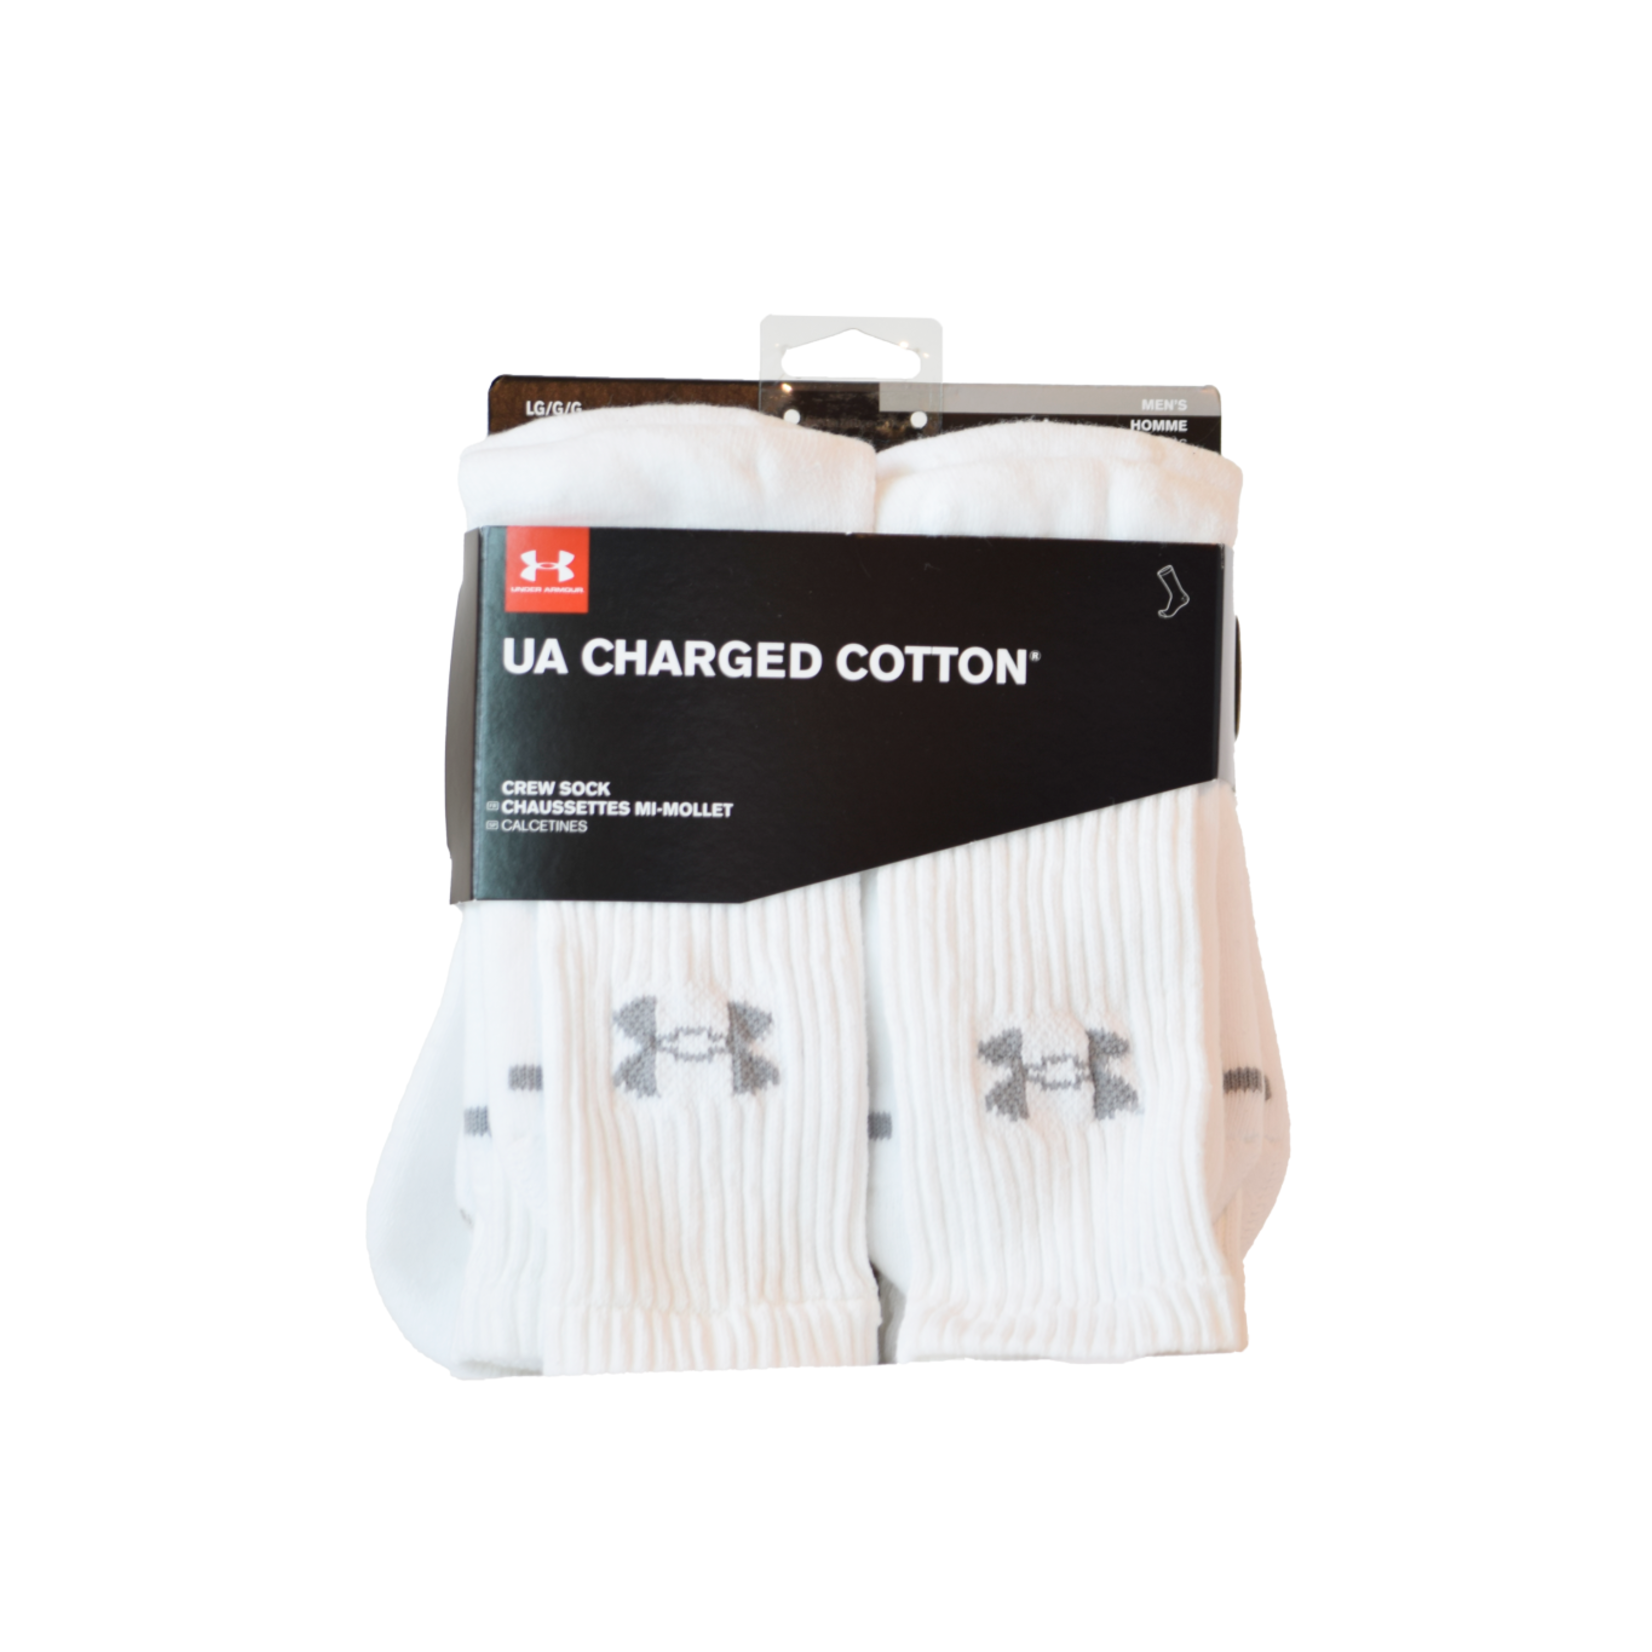 Under Armour Charged Cotton Crew Sock